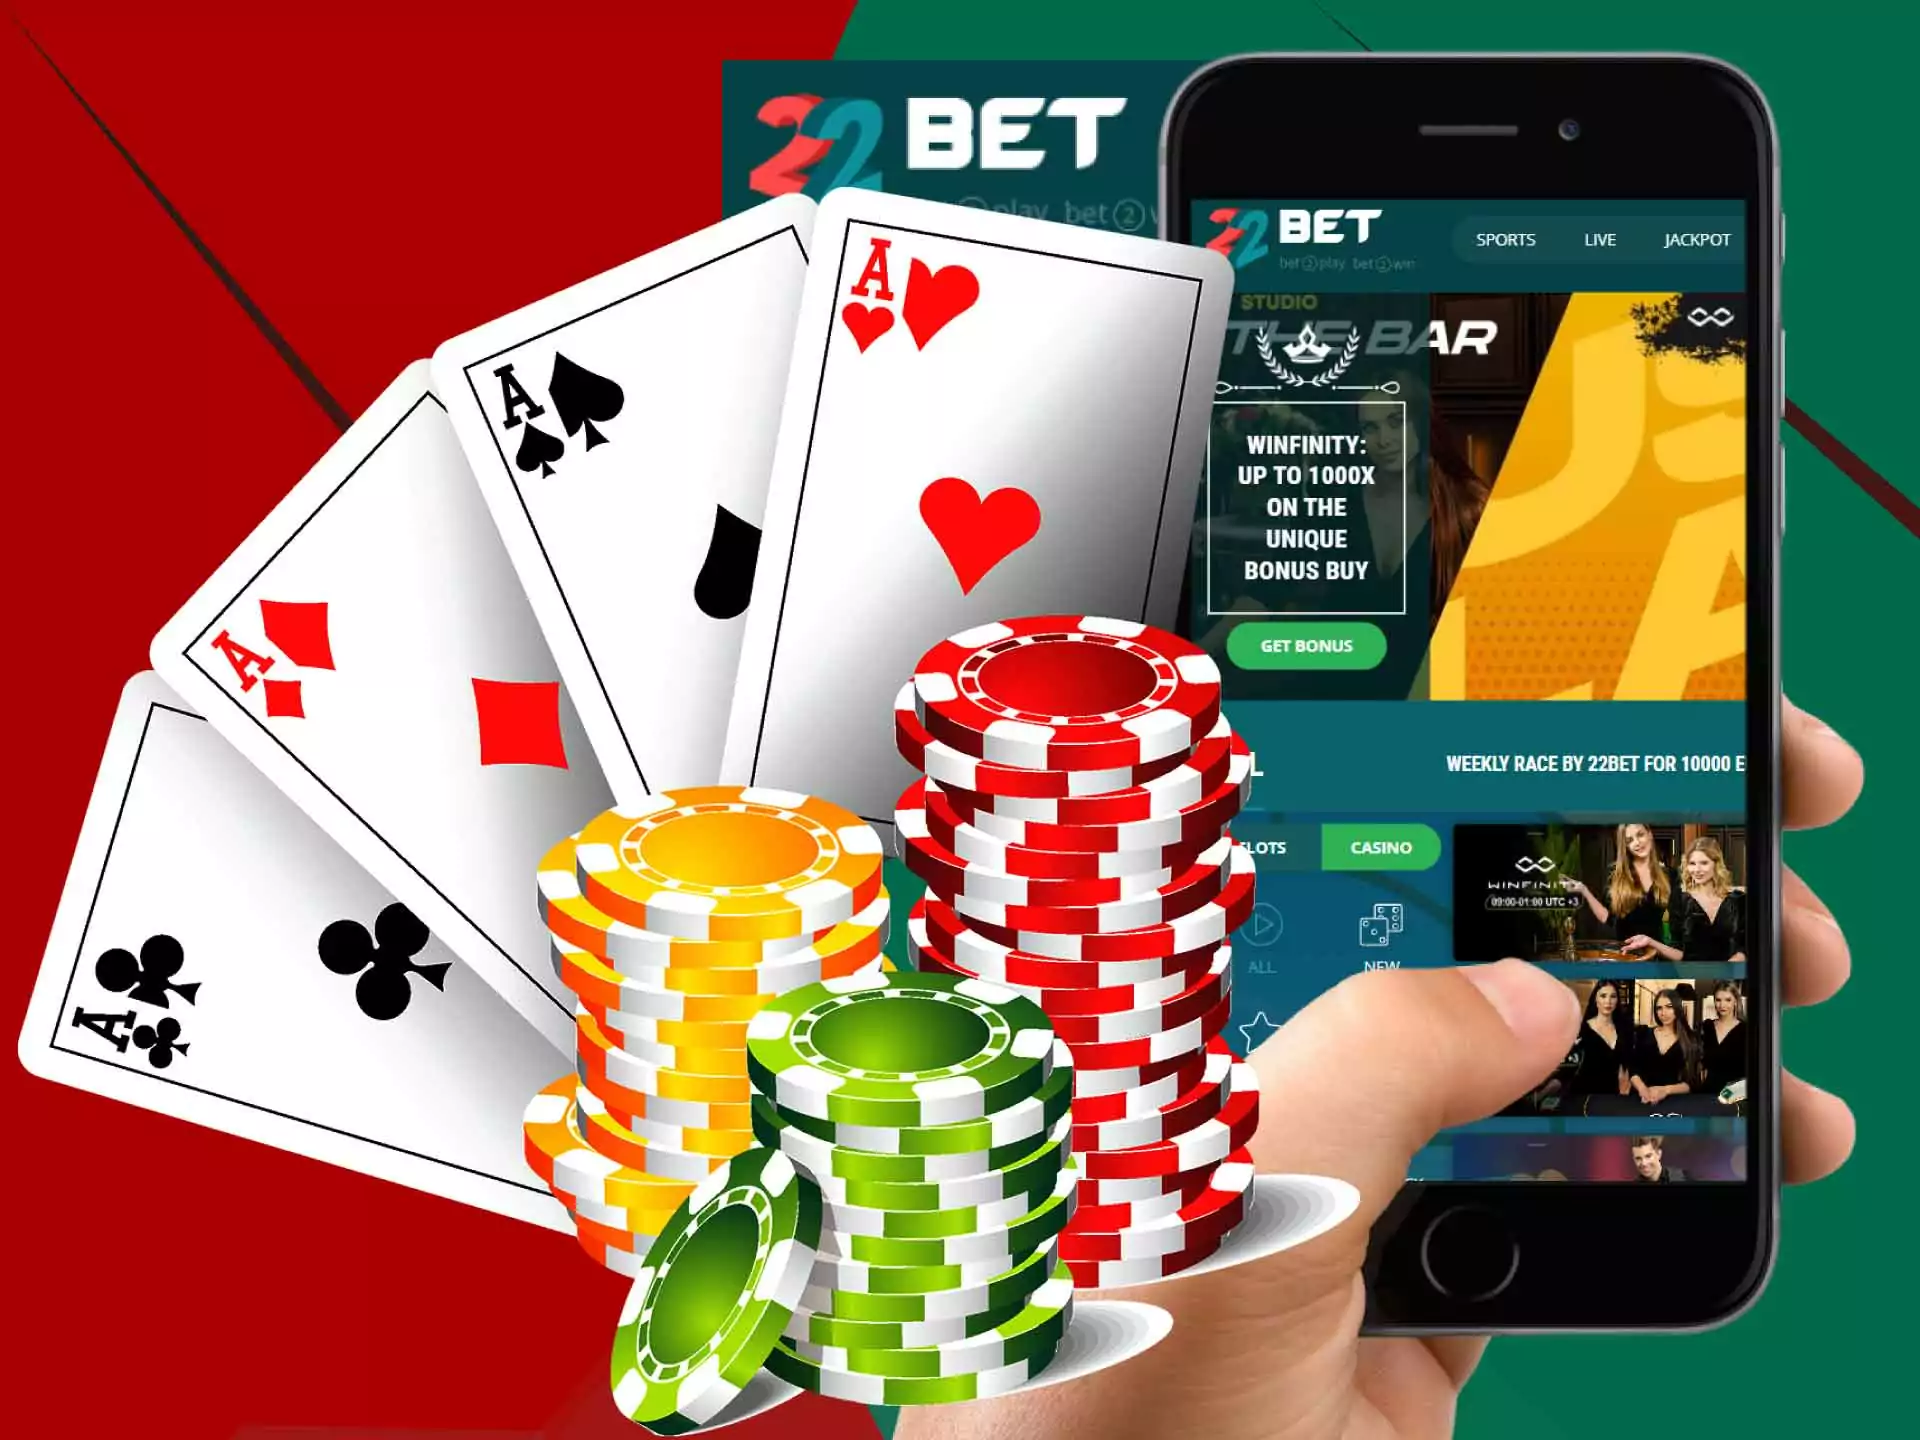 There are various modern and popular casino games in the 22Bet app.